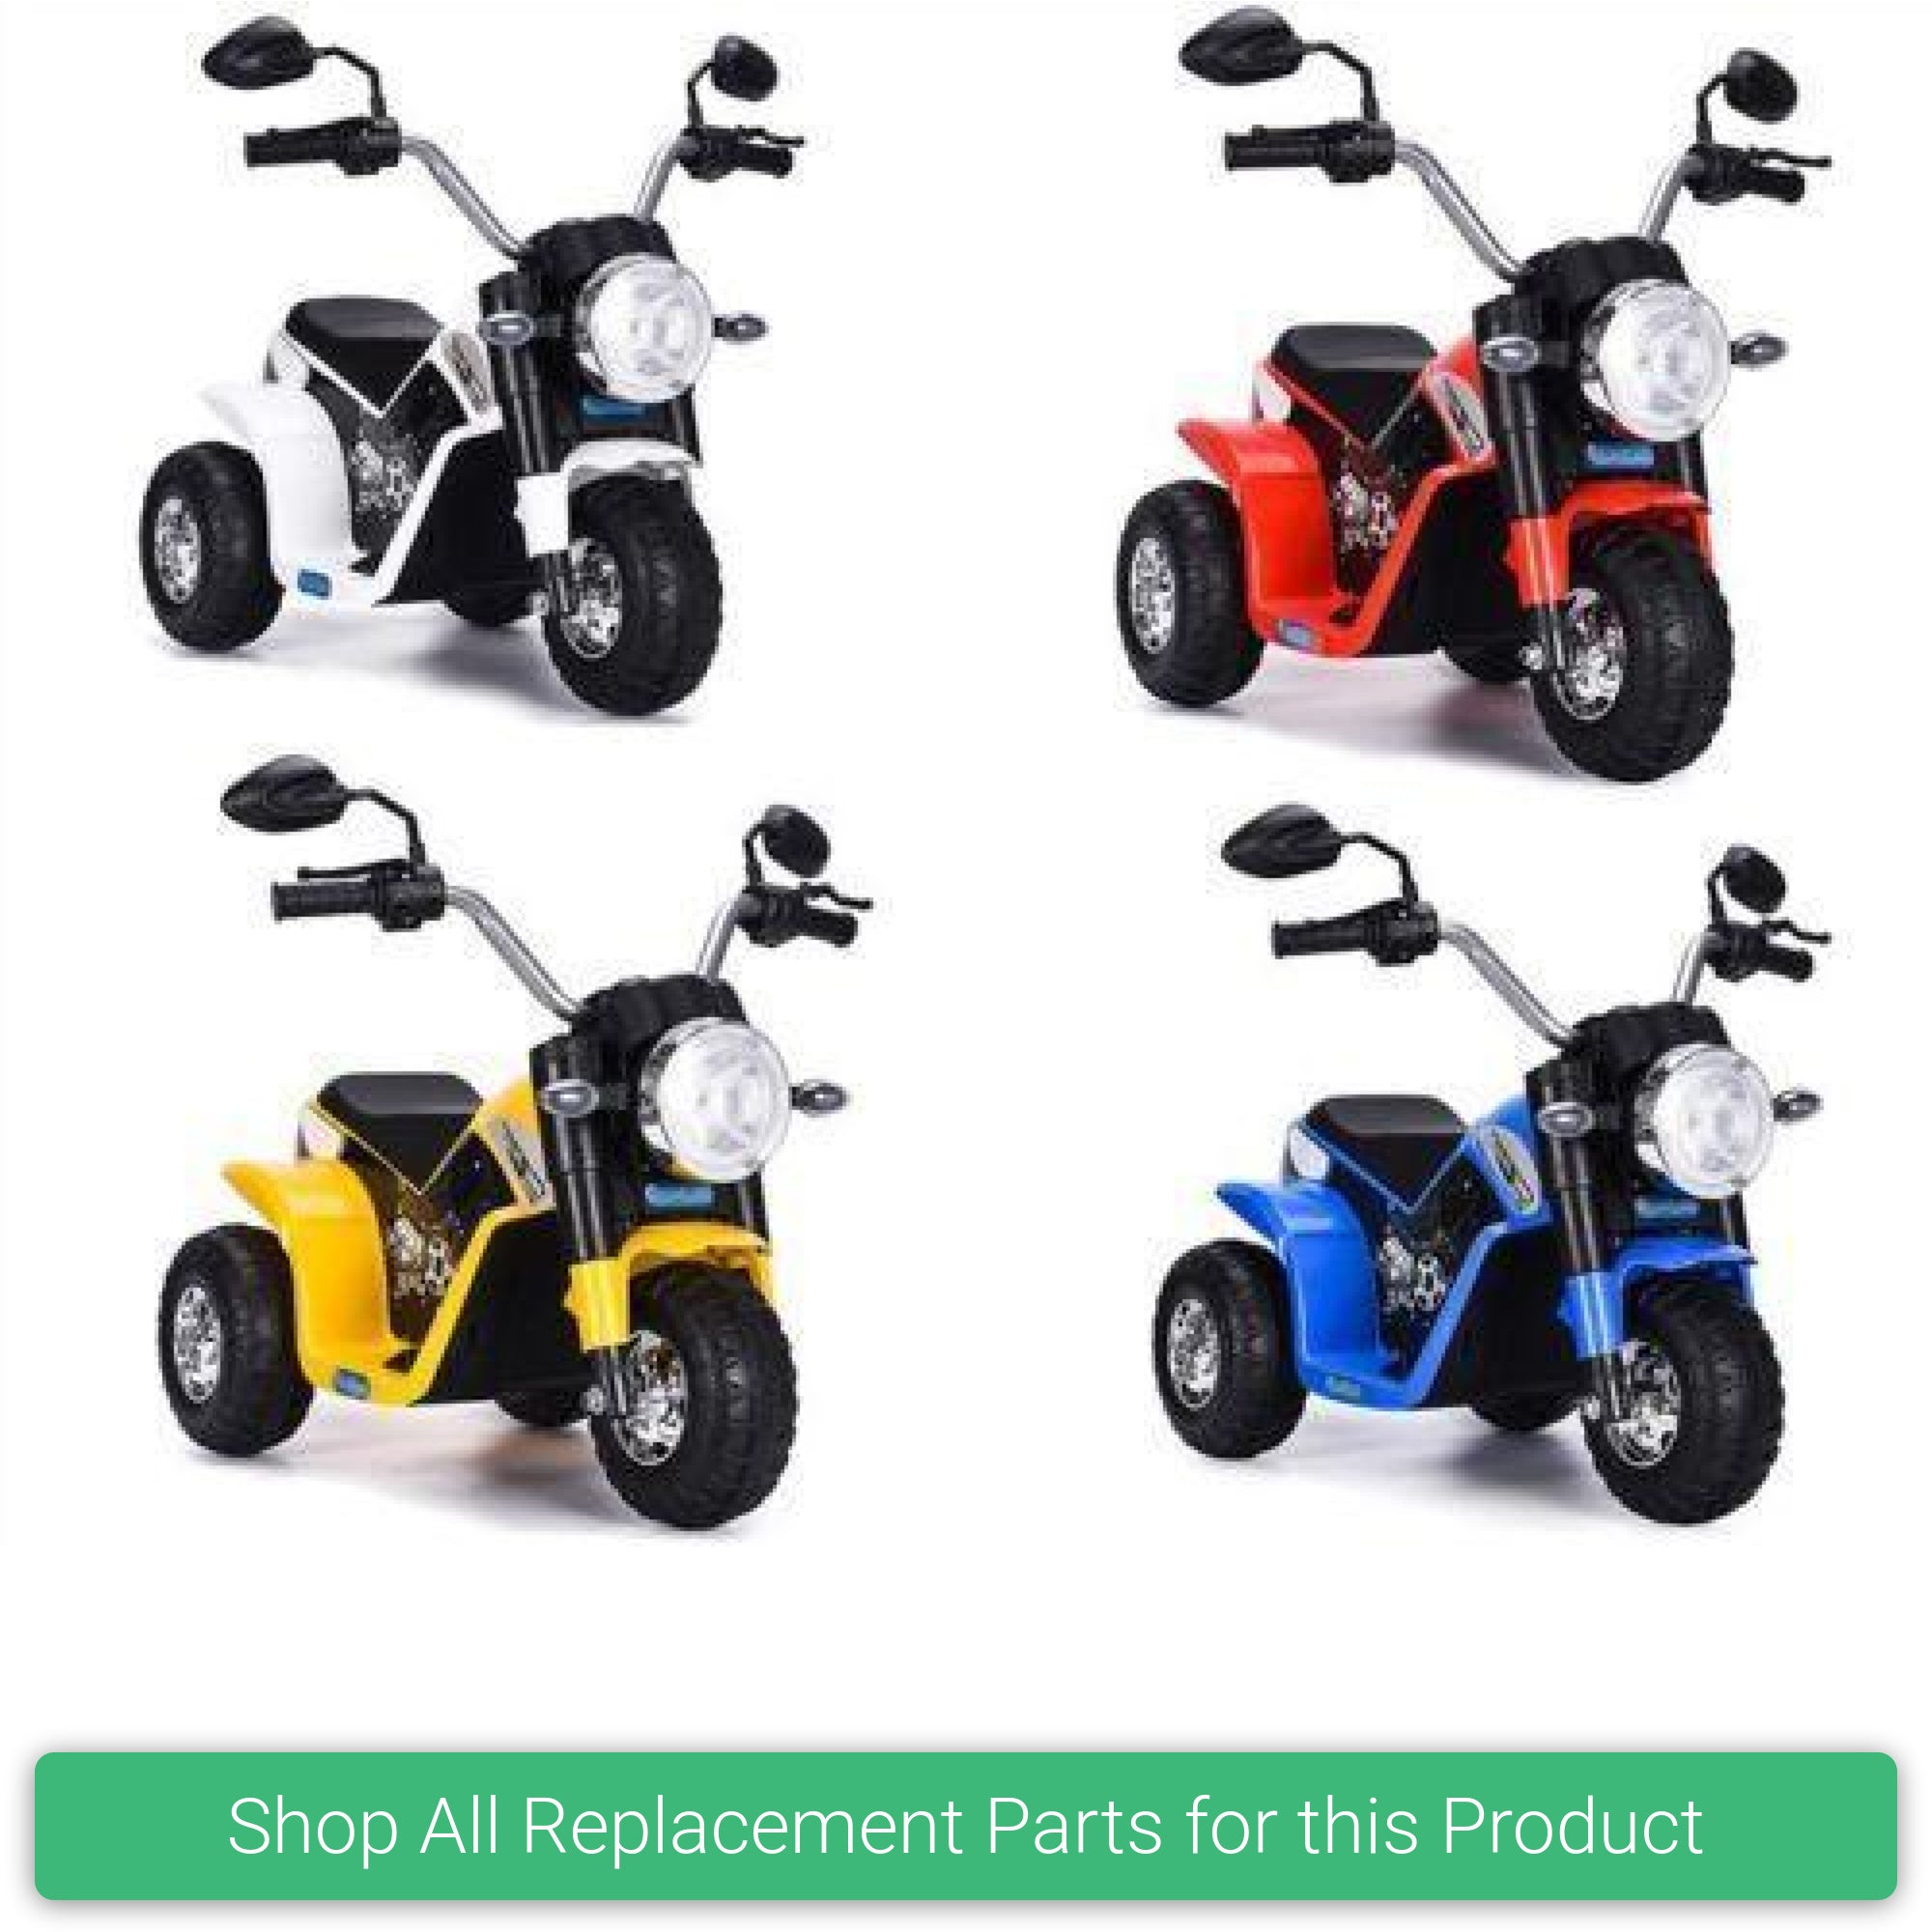 Replacement Parts and Spares for Kids Cool Harley Style Motorbike - HARC-2019V1SS - JC916